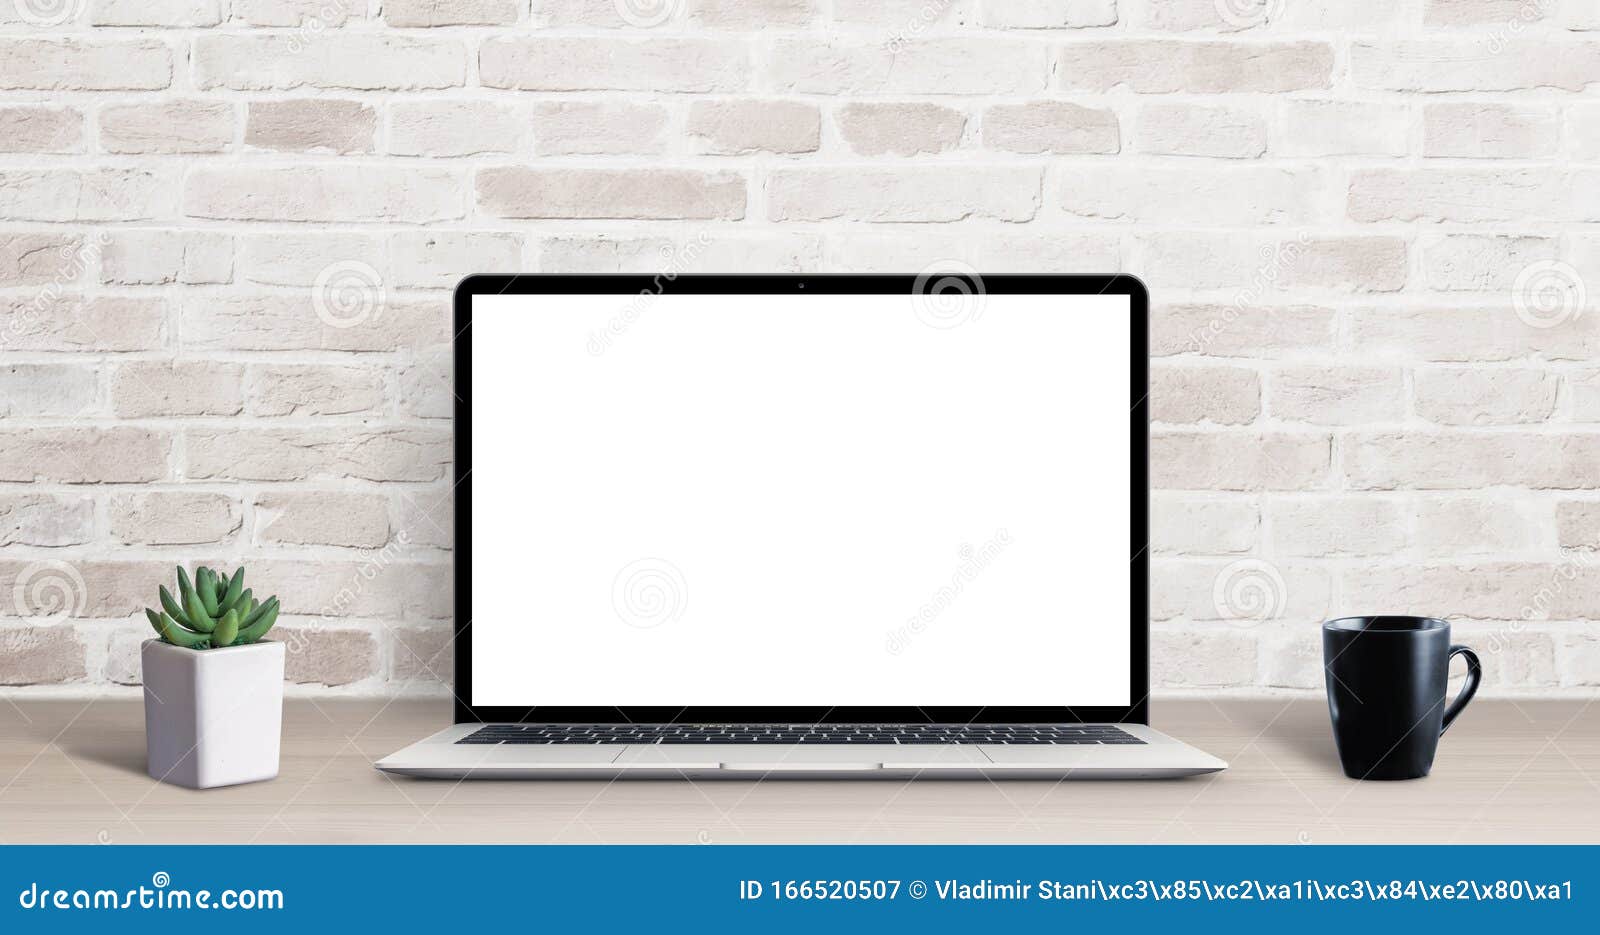 laptop mockup on simple, clean desk with brick wall in background